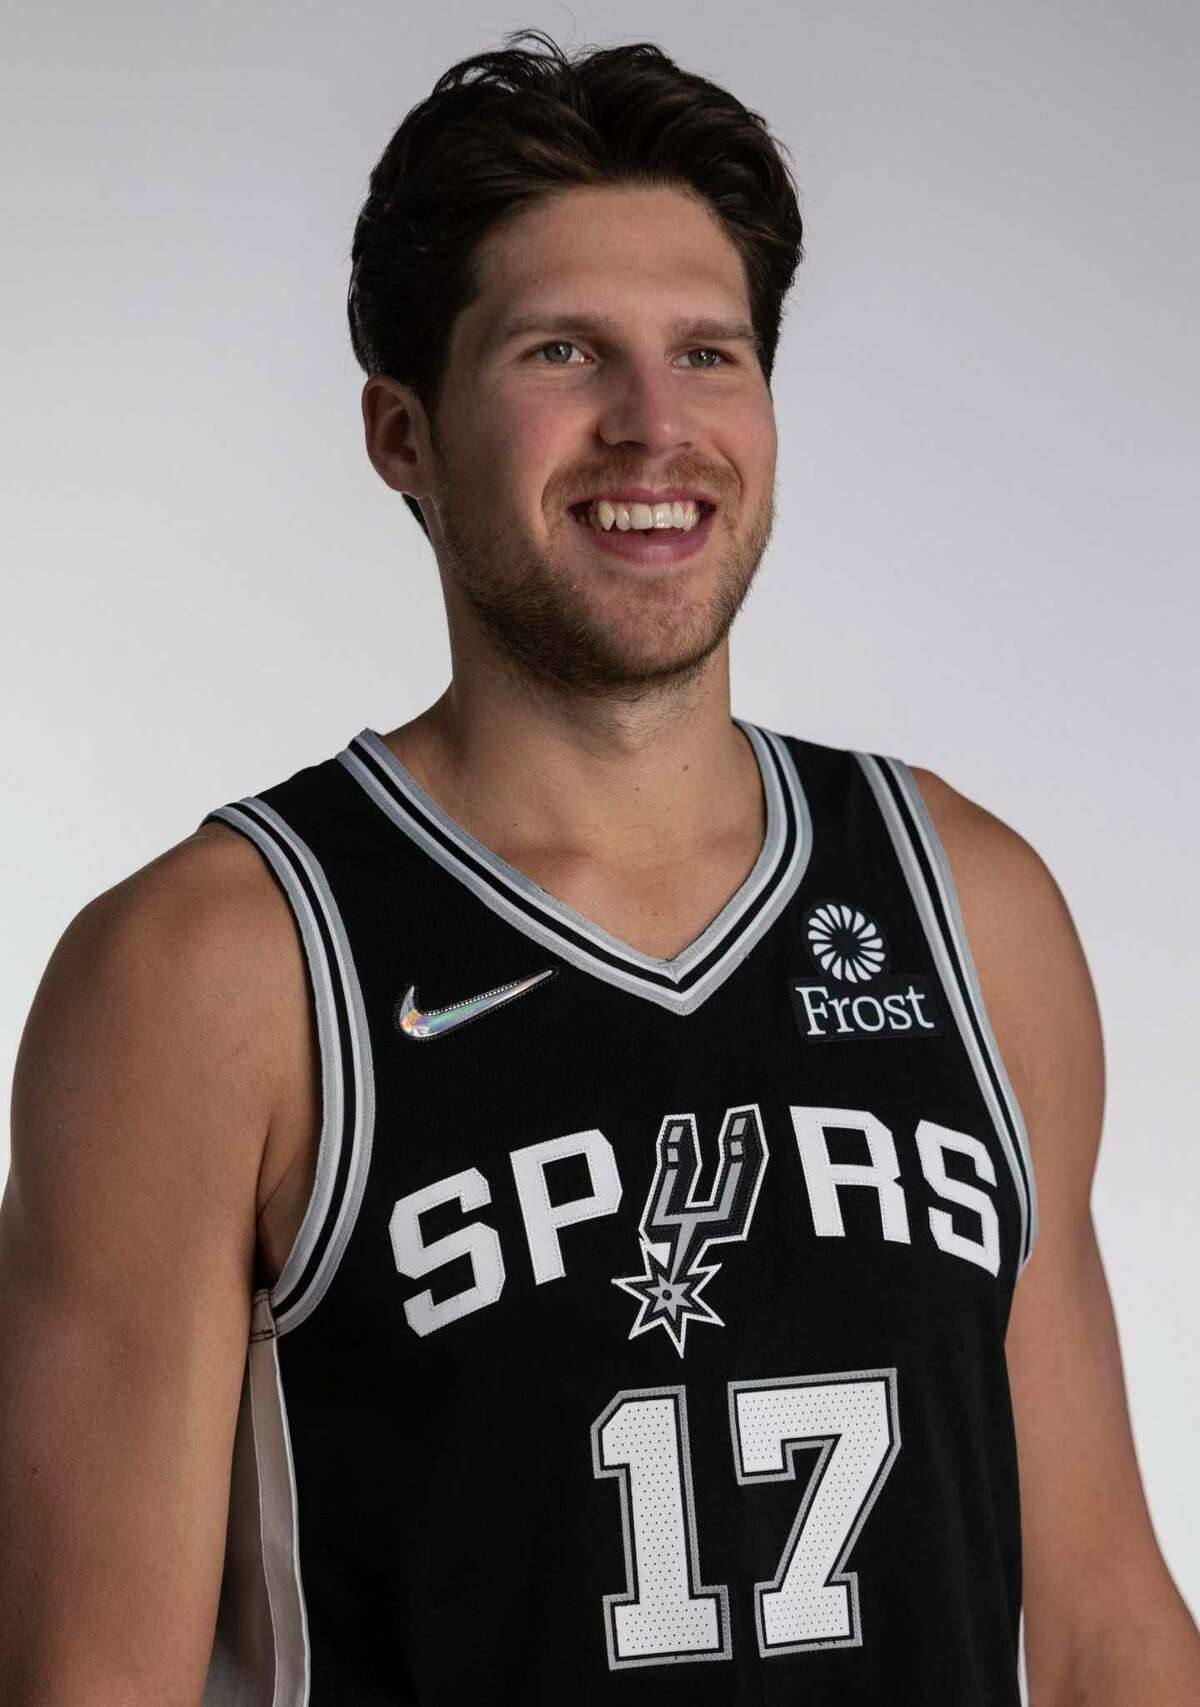 Spurs forward Doug McDermott poses for photos Monday, Sept. 27, 2021 at the Spurs practice facility during the team's media day.